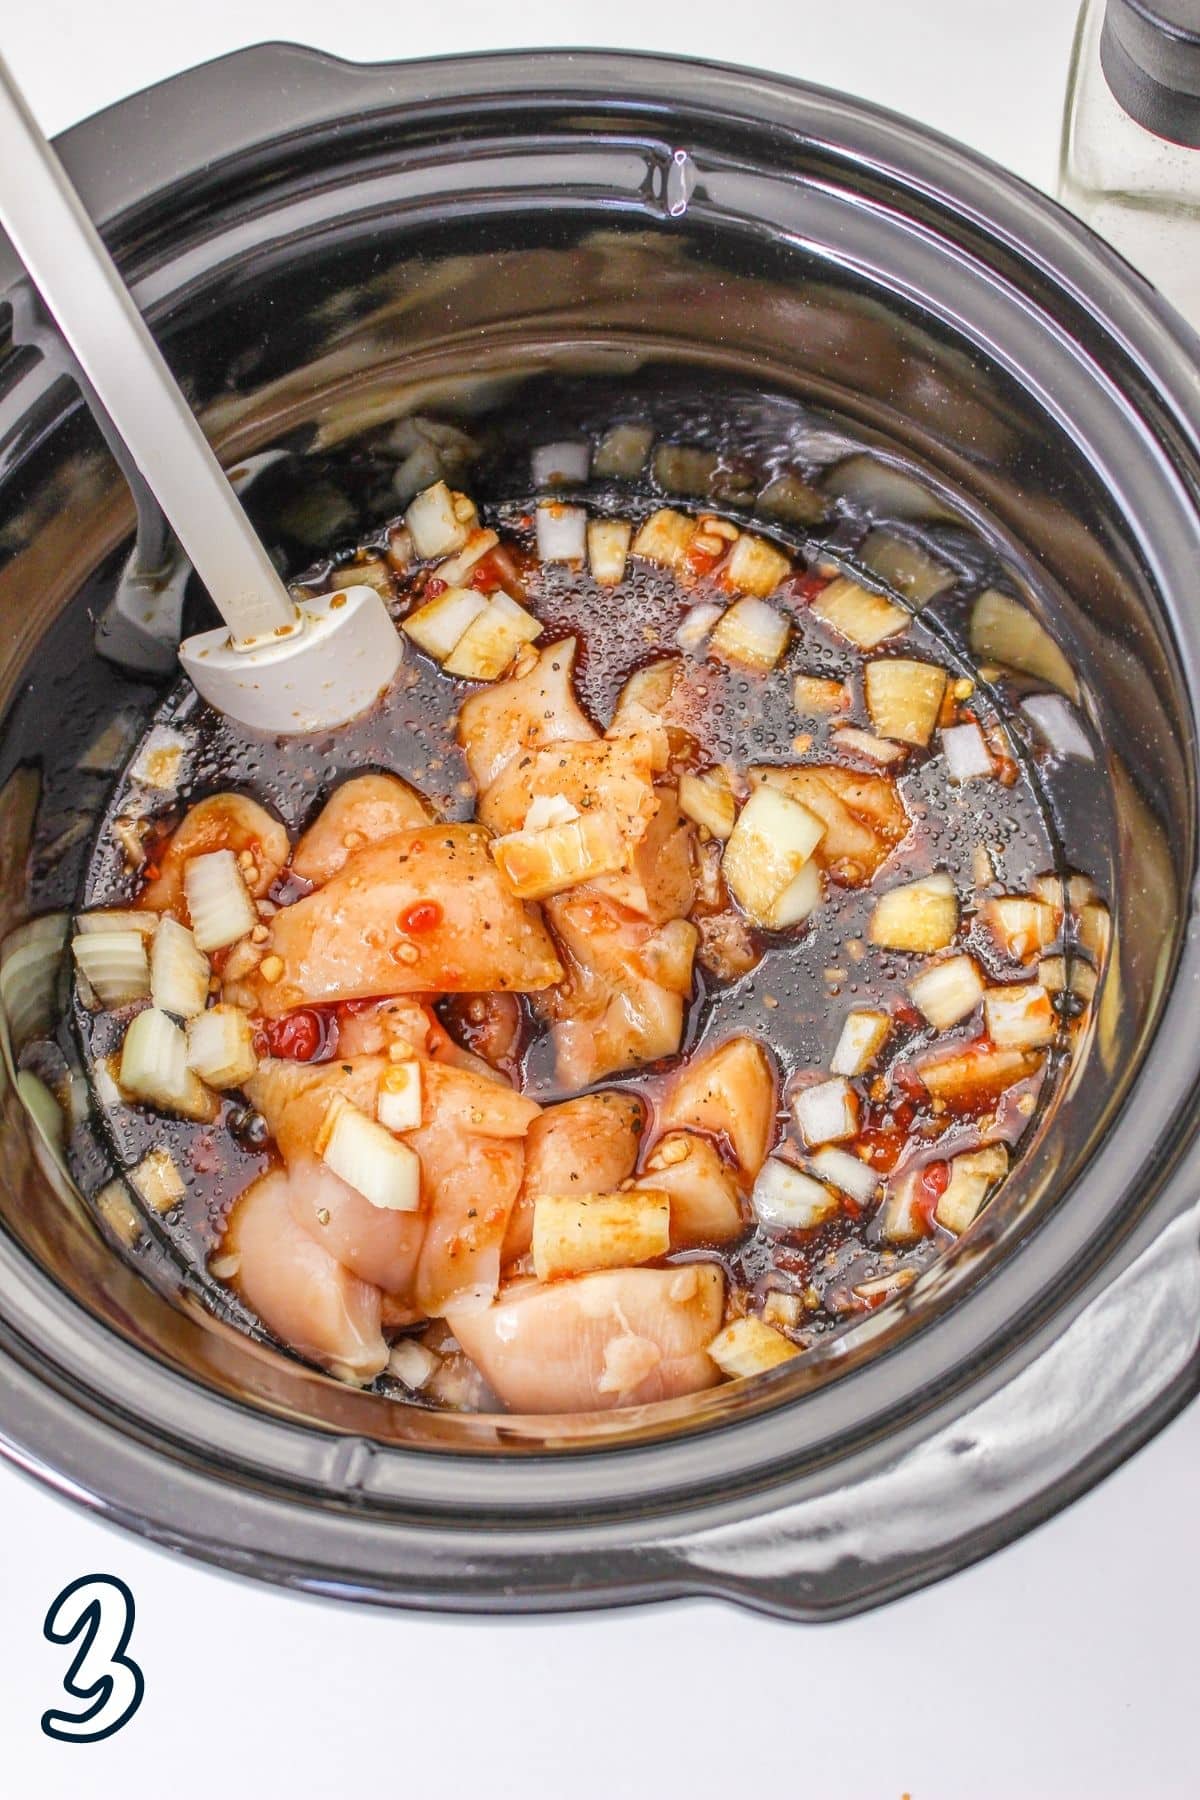 Sesame sauce poured over raw chicken in a crock pot bowl ready to cook. 